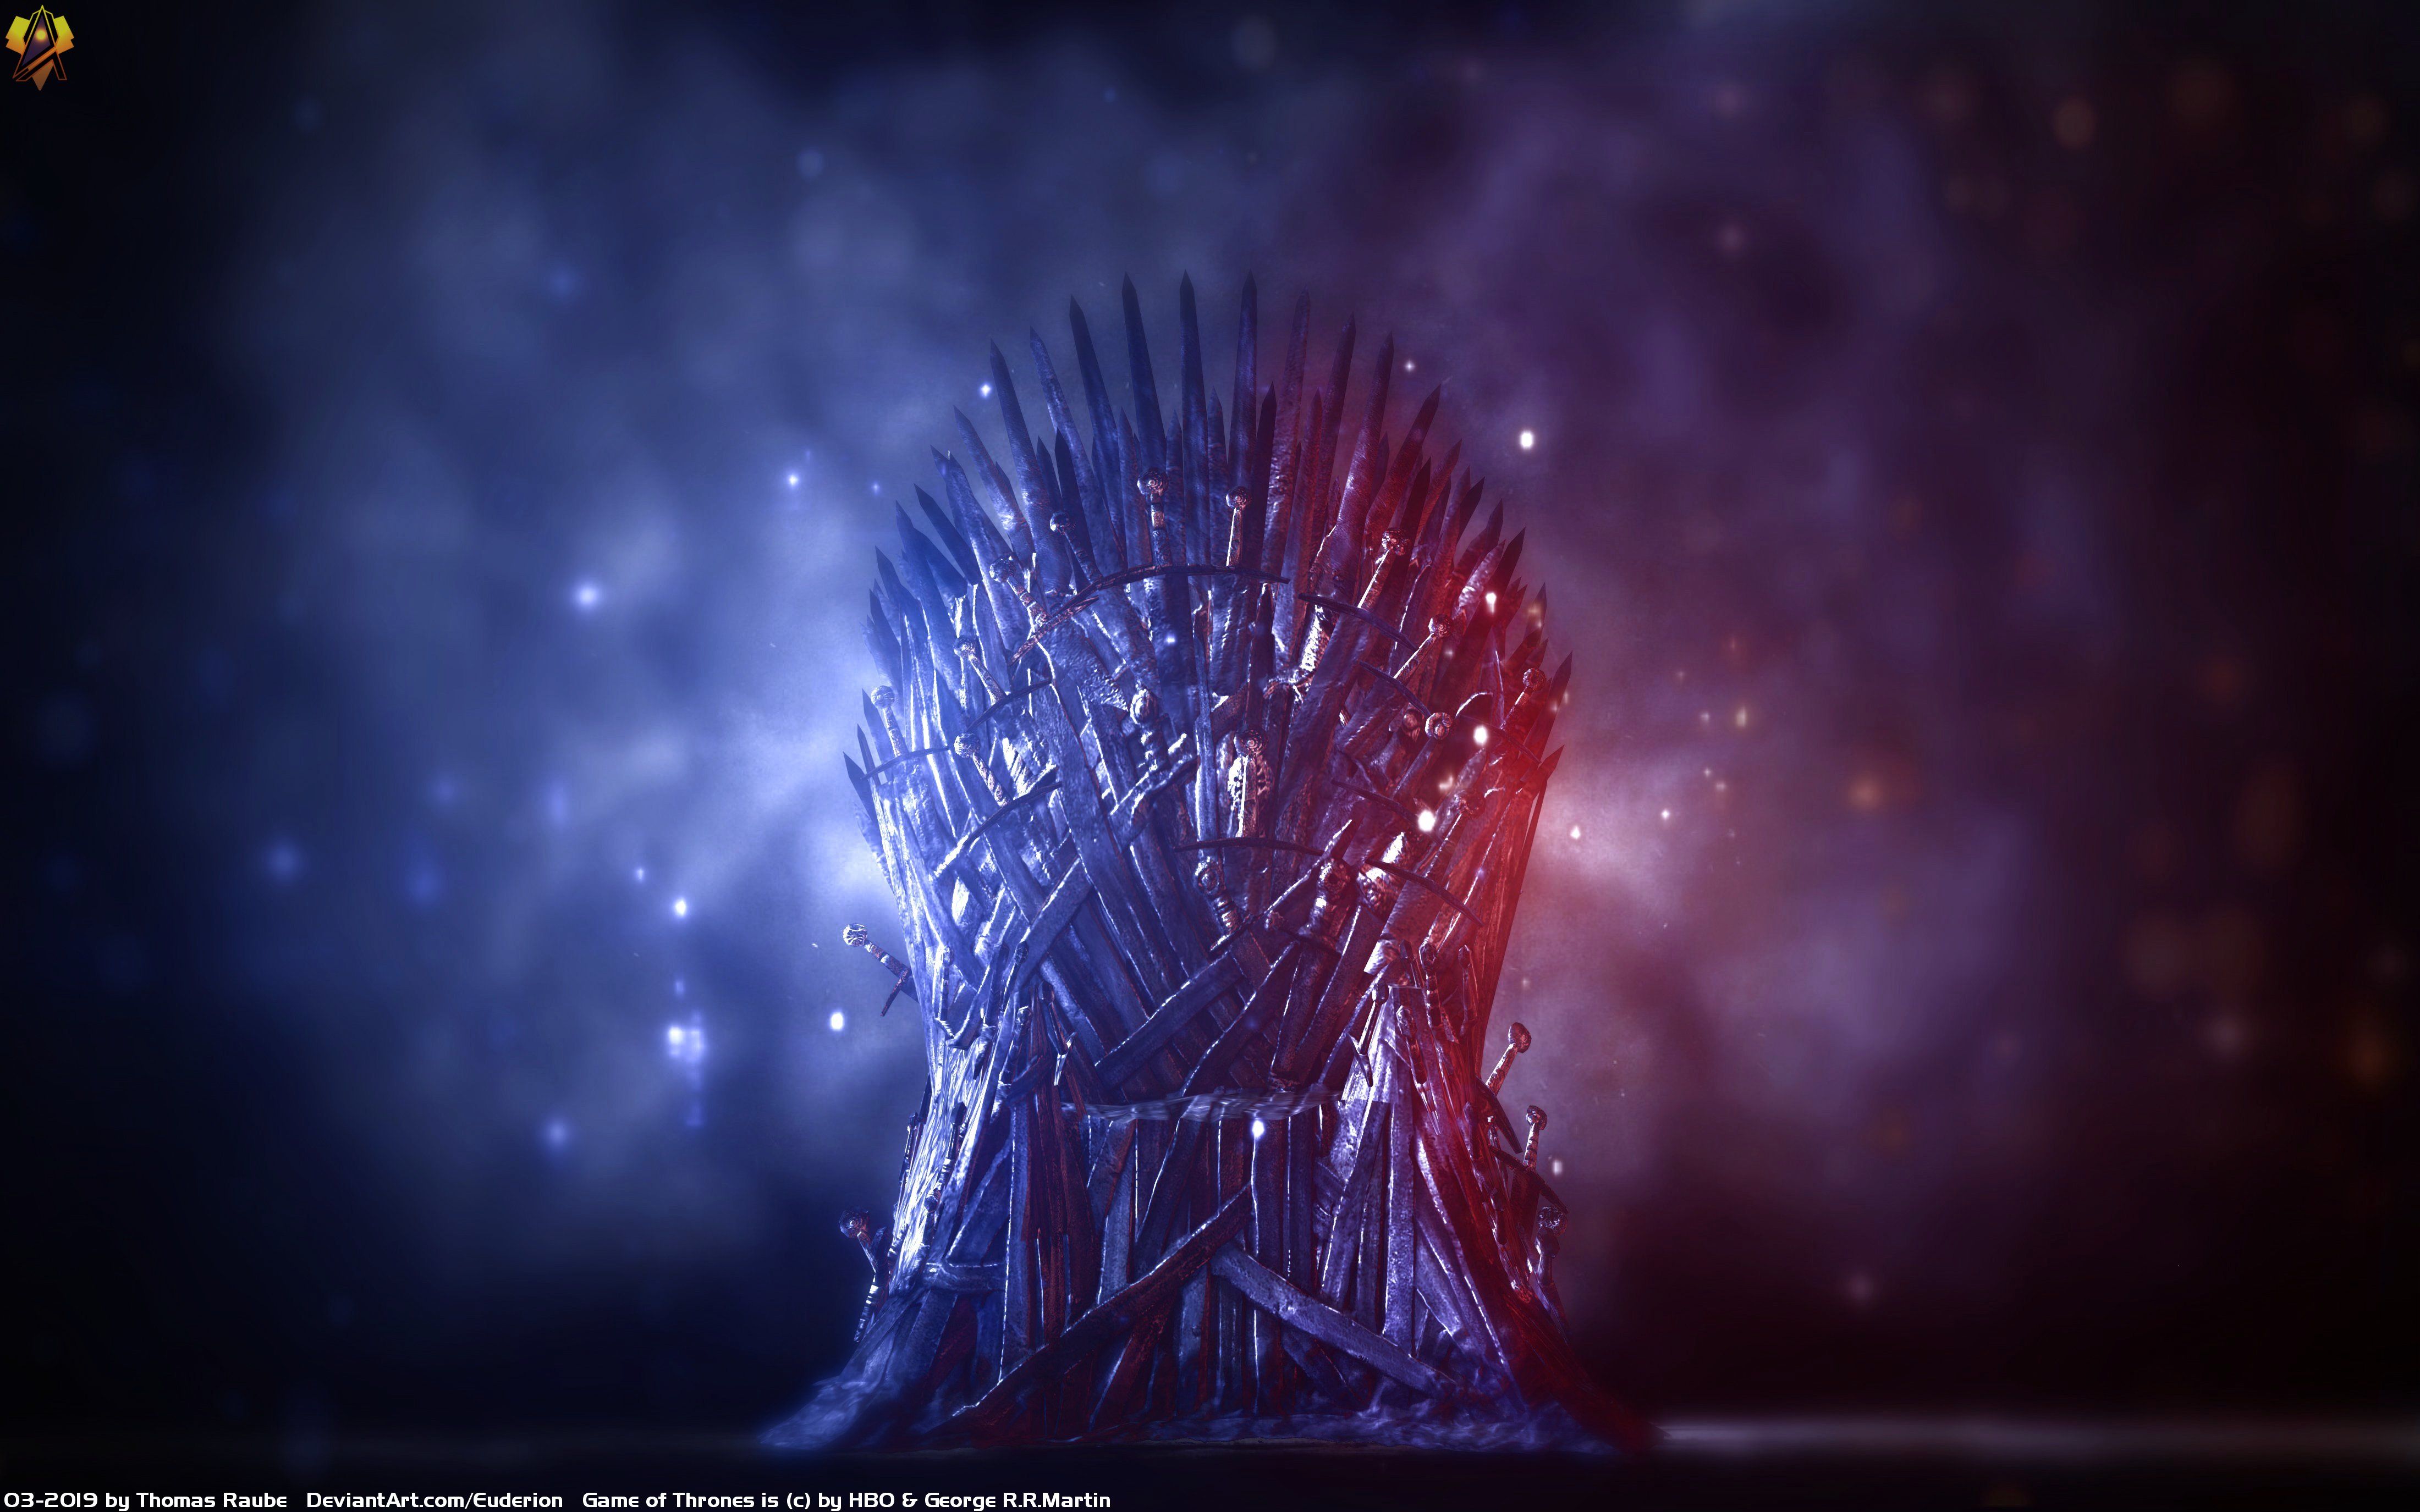 Iron Thrones and Fire 4k Ultra HD Wallpaper. Background